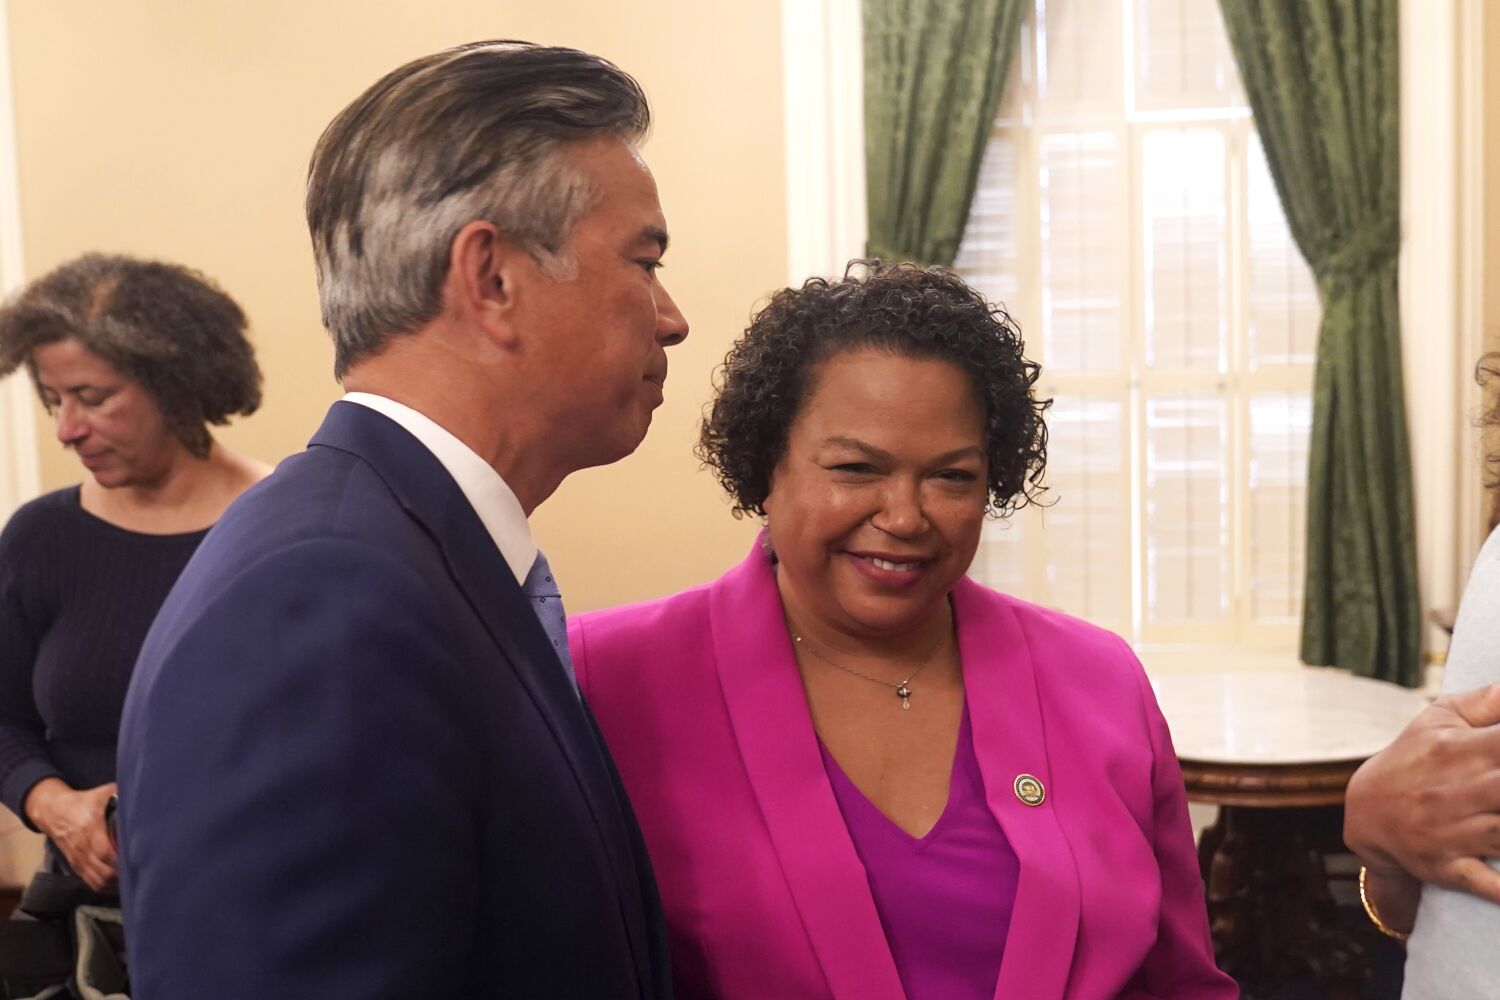 Editorial: Of course the California attorney general's wife shouldn't oversee his budget